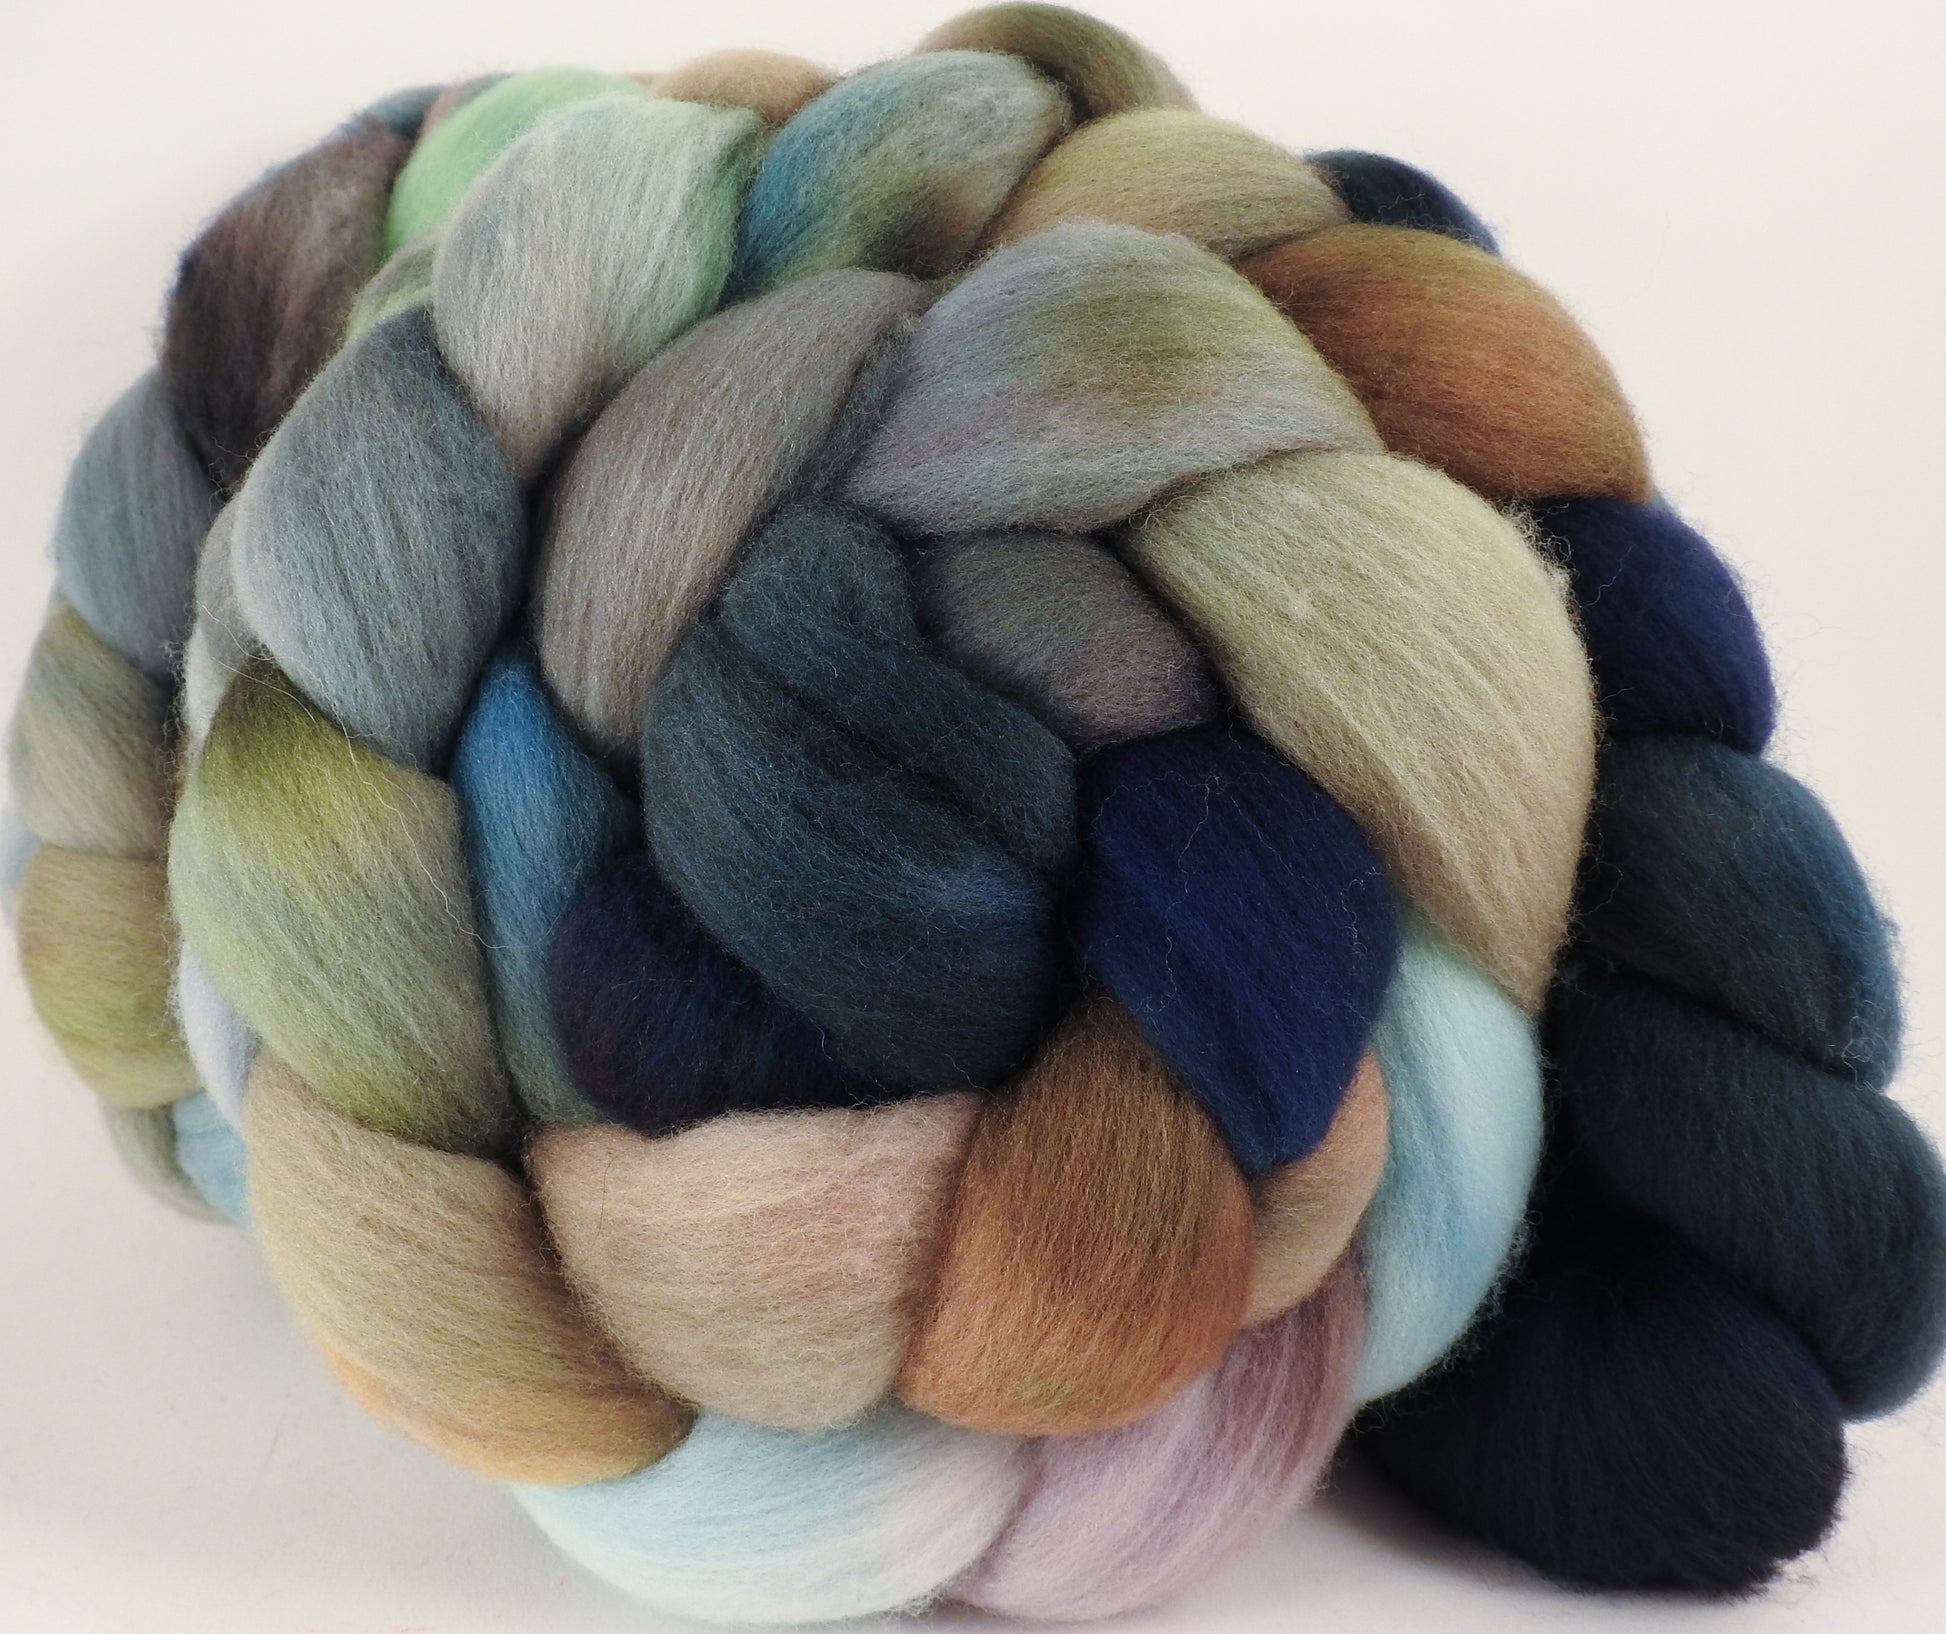 Hand dyed top for spinning - Downpour - (5.1 oz.) Organic Polwarth - Inglenook Fibers